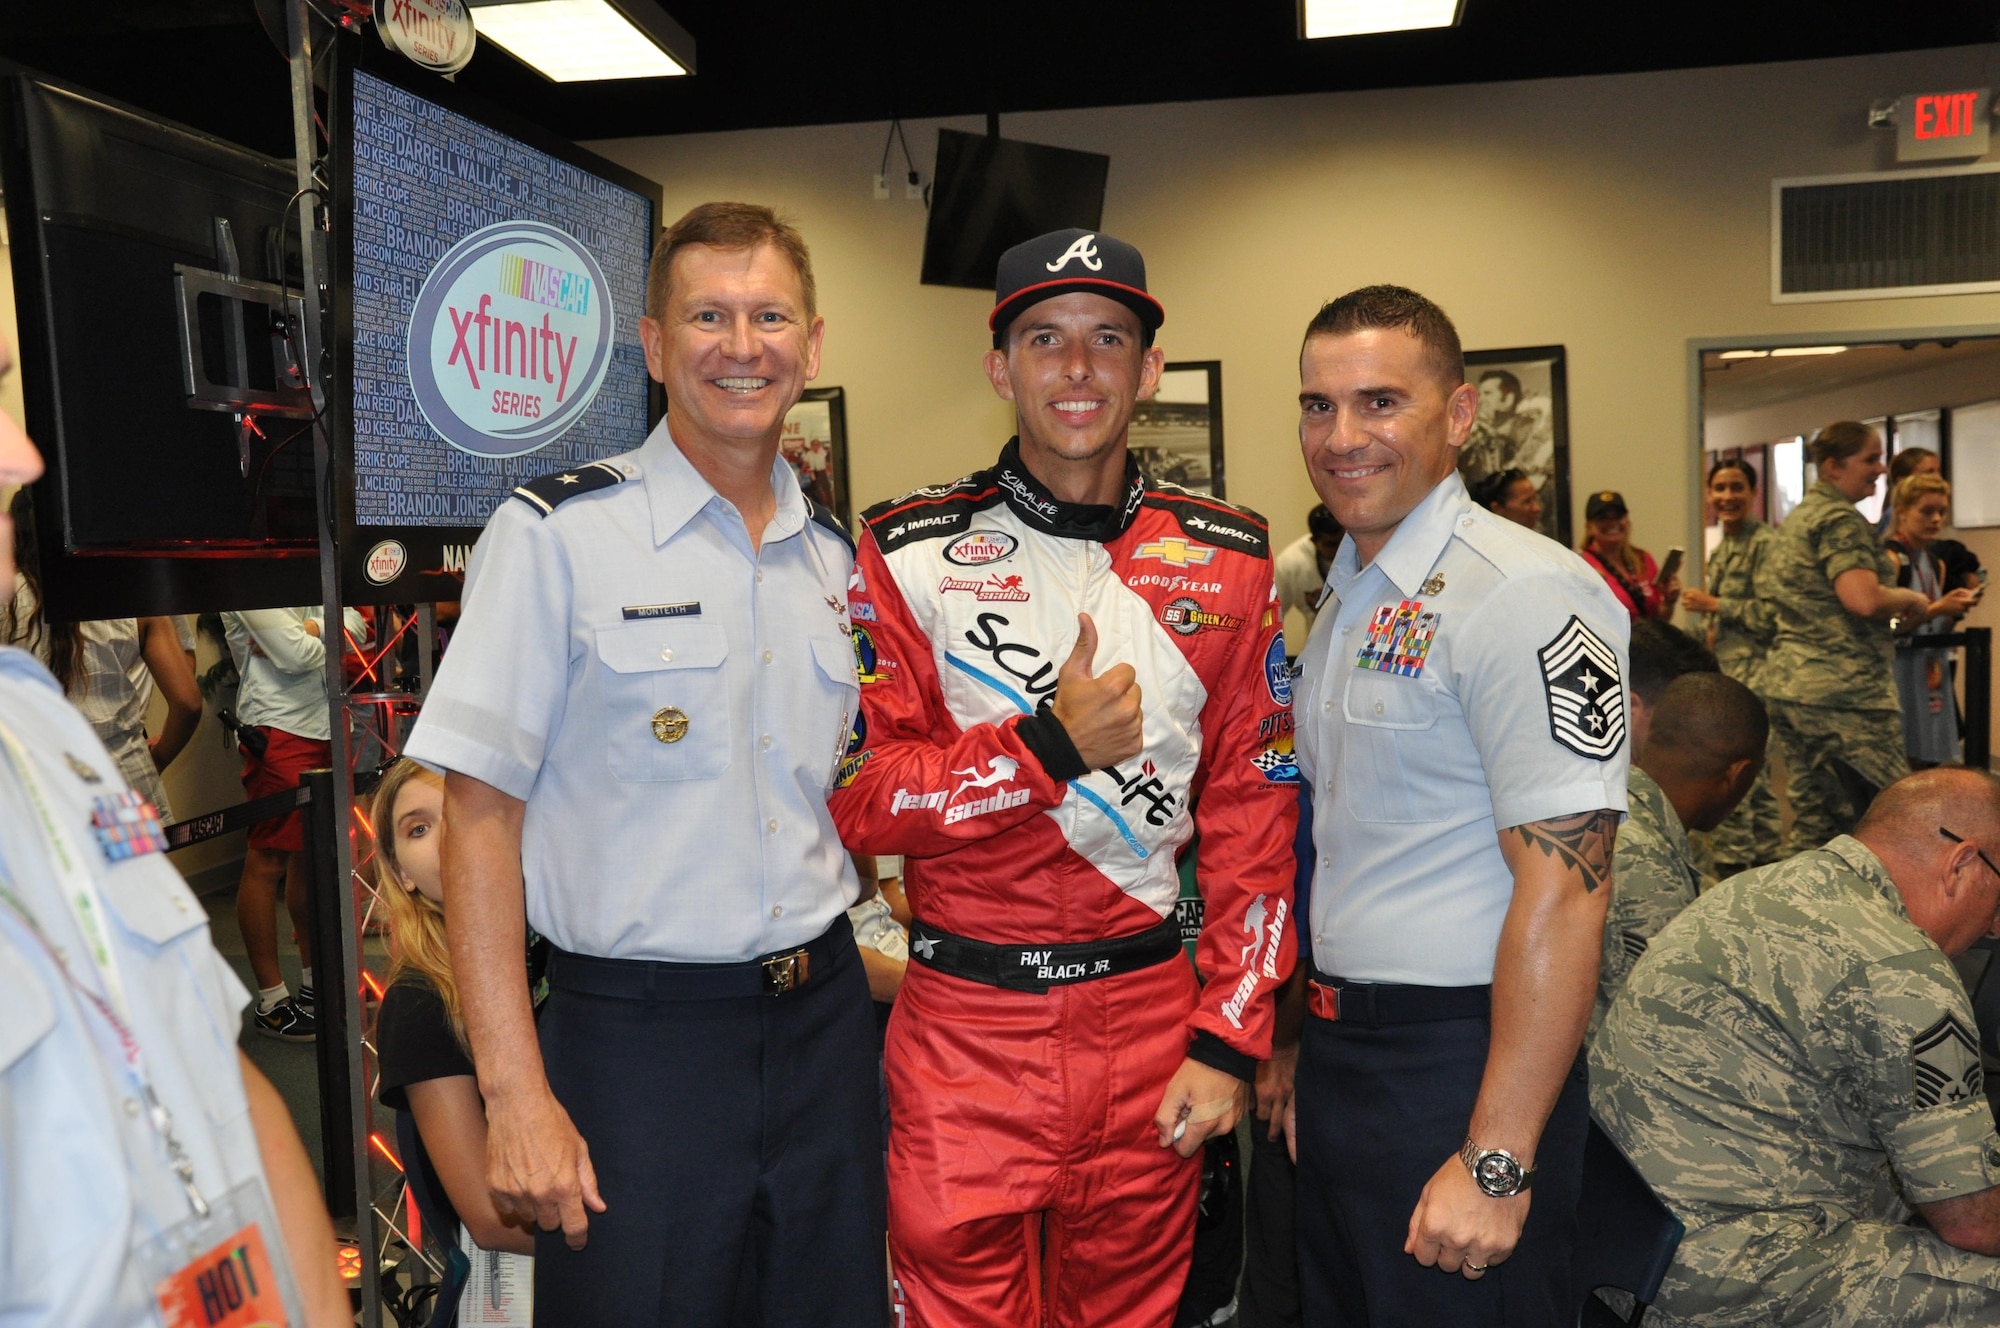 Brig. Gen. Wayne Monteith, 45th Space Wing commander, left, and Chief Master Sgt. Jason Lamoureux, 45th SW command chief, pose for a photo with NASCAR driver Ray Black Jr. at the NASCAR Drivers and Crew Chiefs meeting at Daytona International Speedway July 1, 2016. NASCAR driver Ray Black Jr. from SS Green Light Racing supported the wing by displaying the 45th Space Wing name across the windshield of his Chevrolet Camaro No. 07 racecar during the race instead of the typical Xfinity logo that is displayed for Xfinity races. (U.S. Air Force photo by 1st Lt. Alicia Premo/Released)